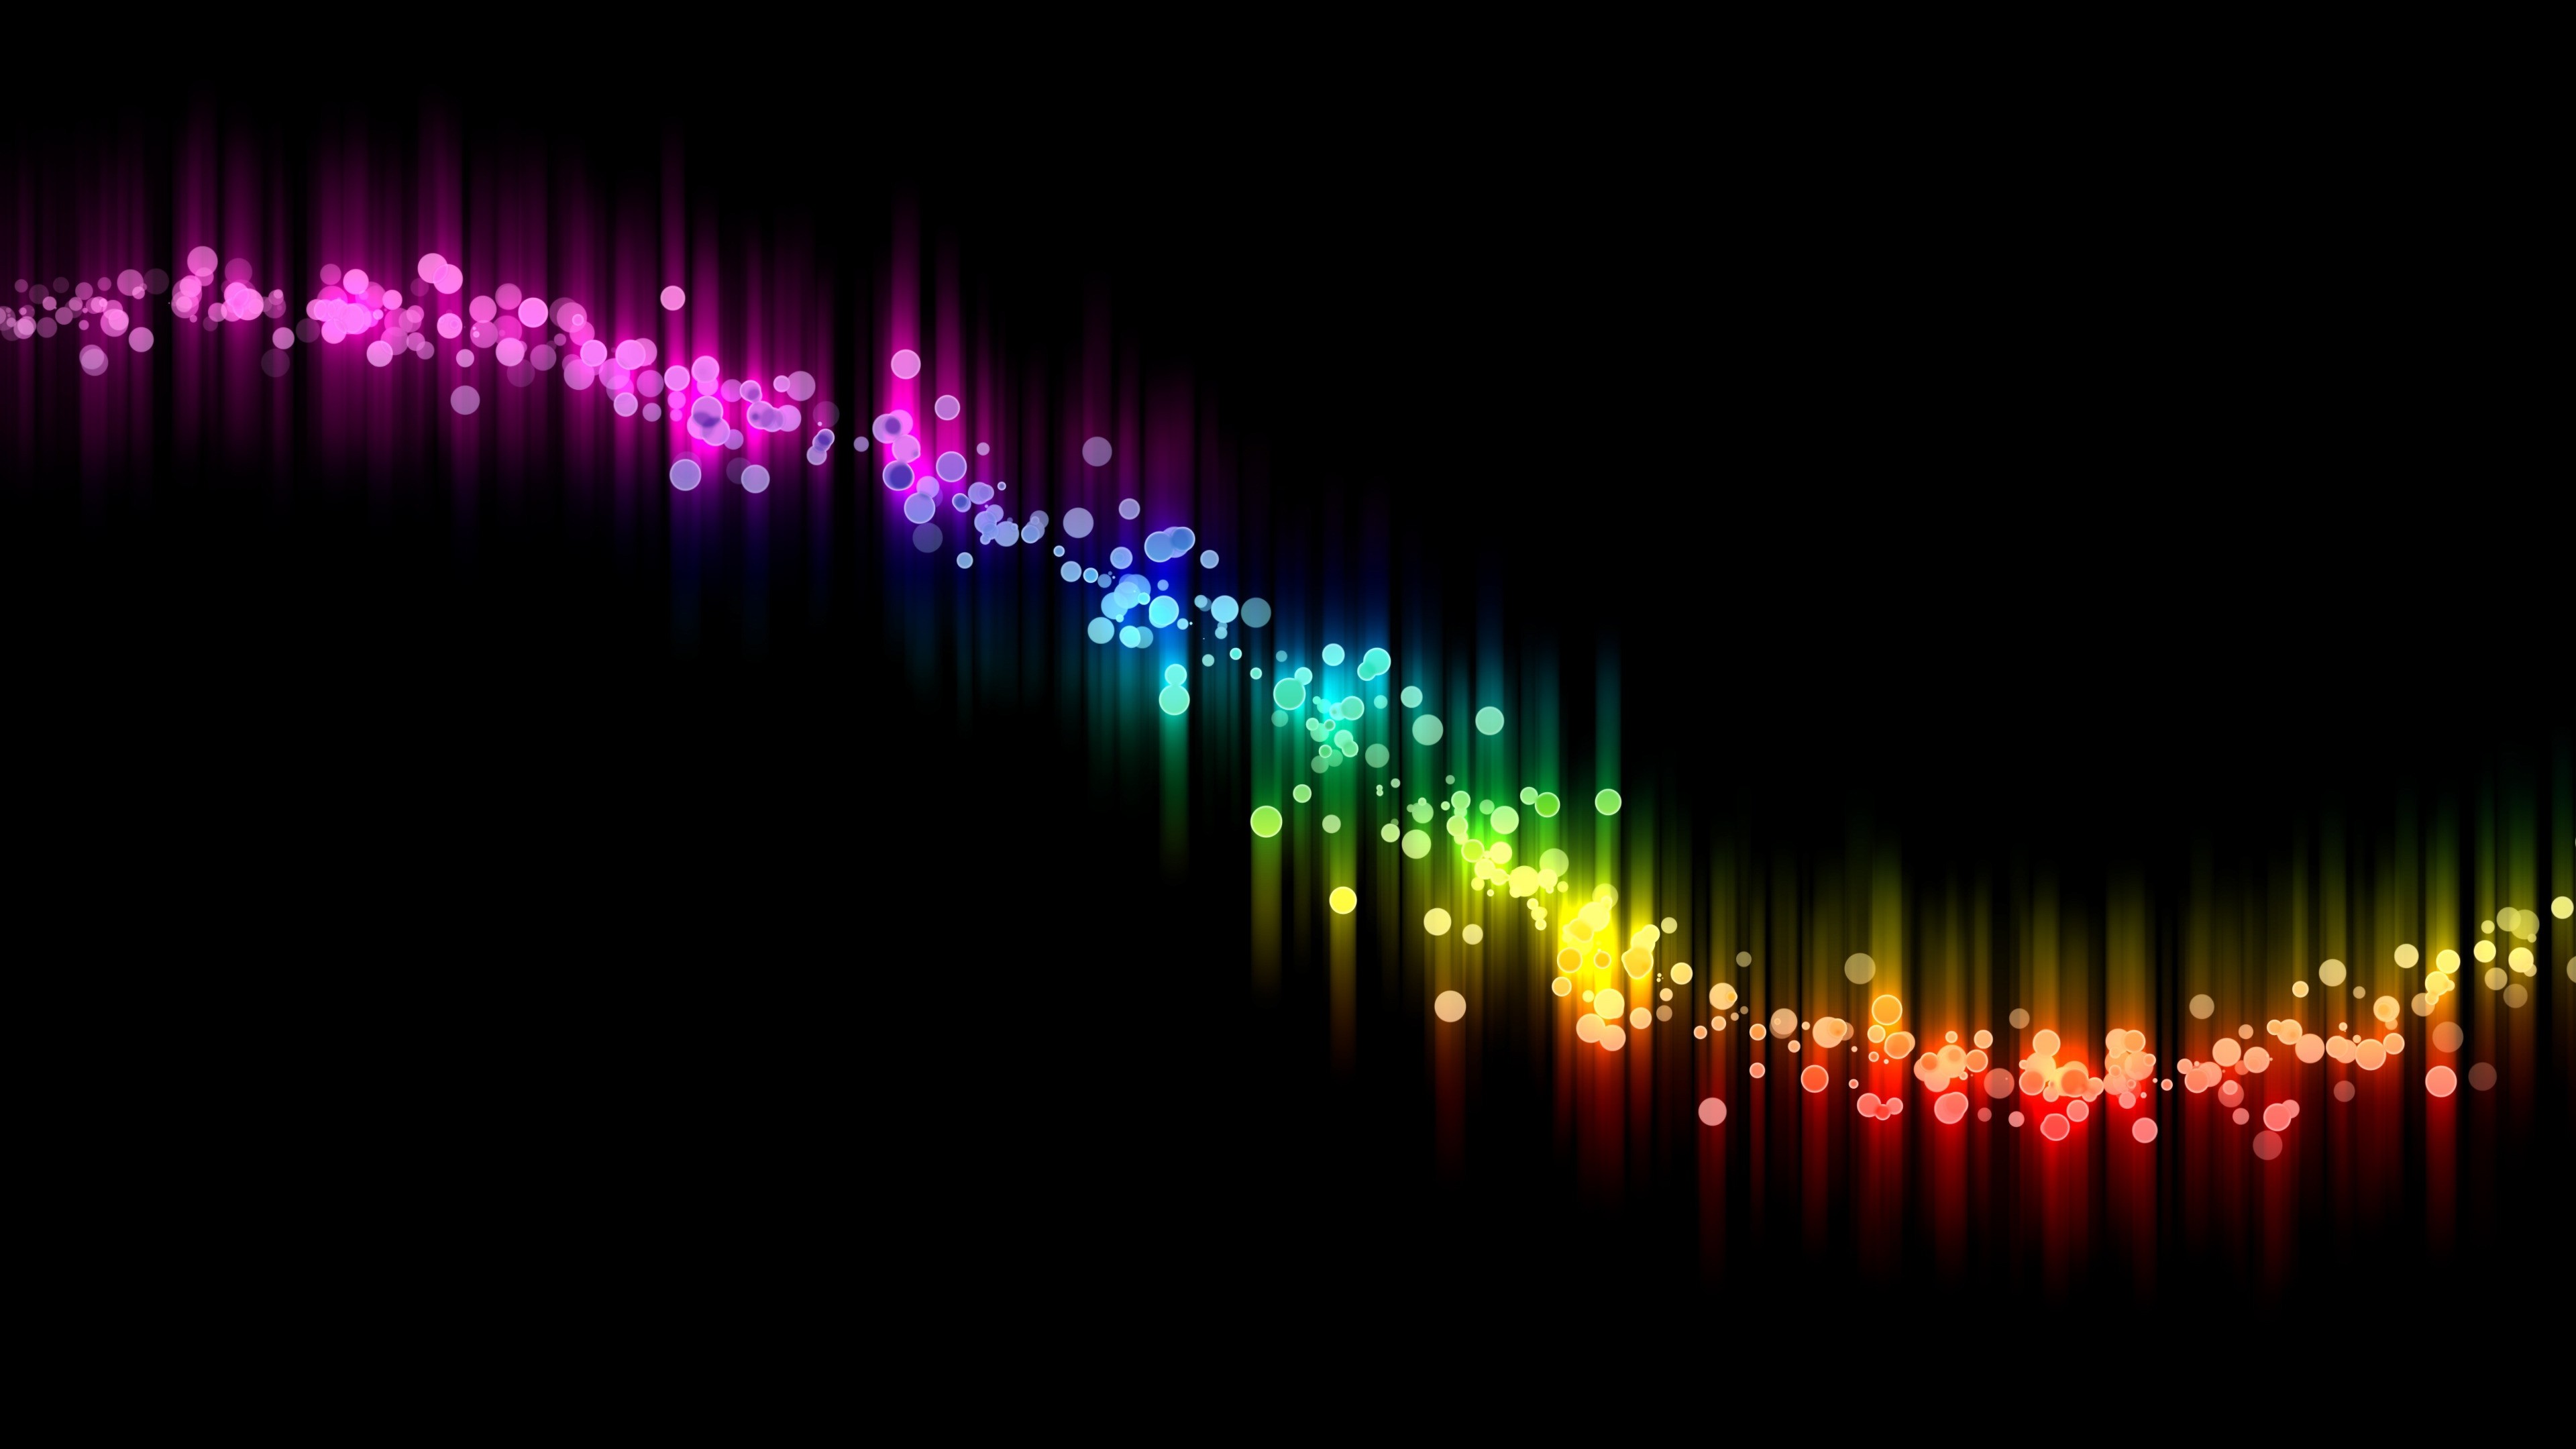 General 3840x2160 colorful abstract digital art simple background black background gradient spectrum